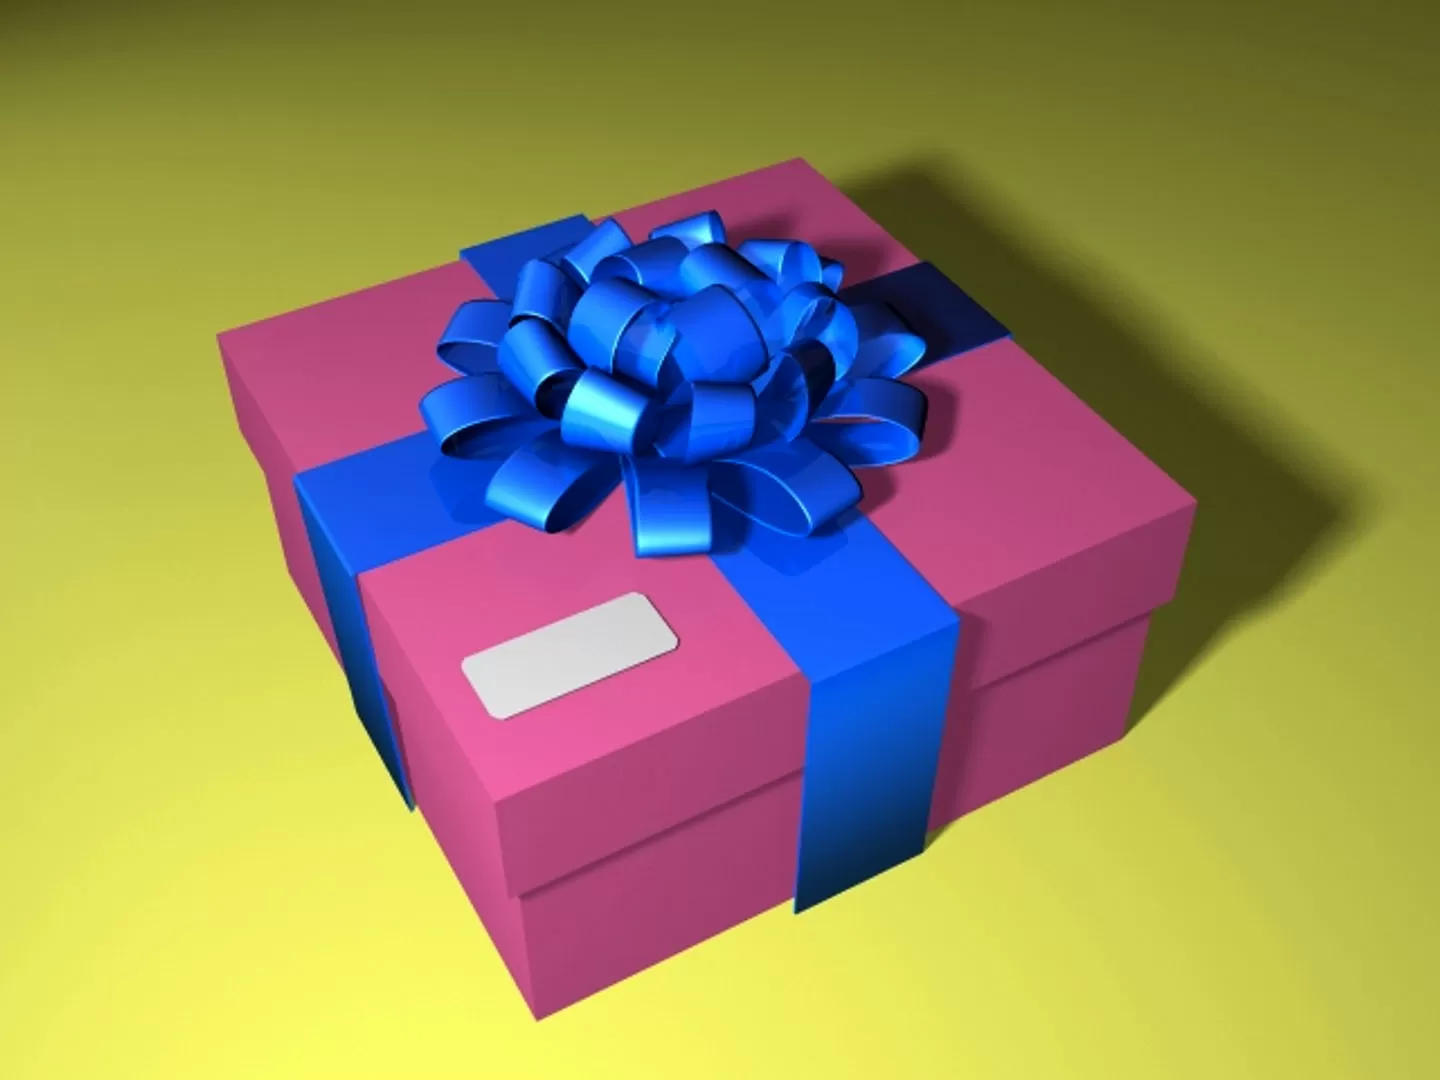 Prank Gift Boxes: The Fun Way to Surprise Your Friends!